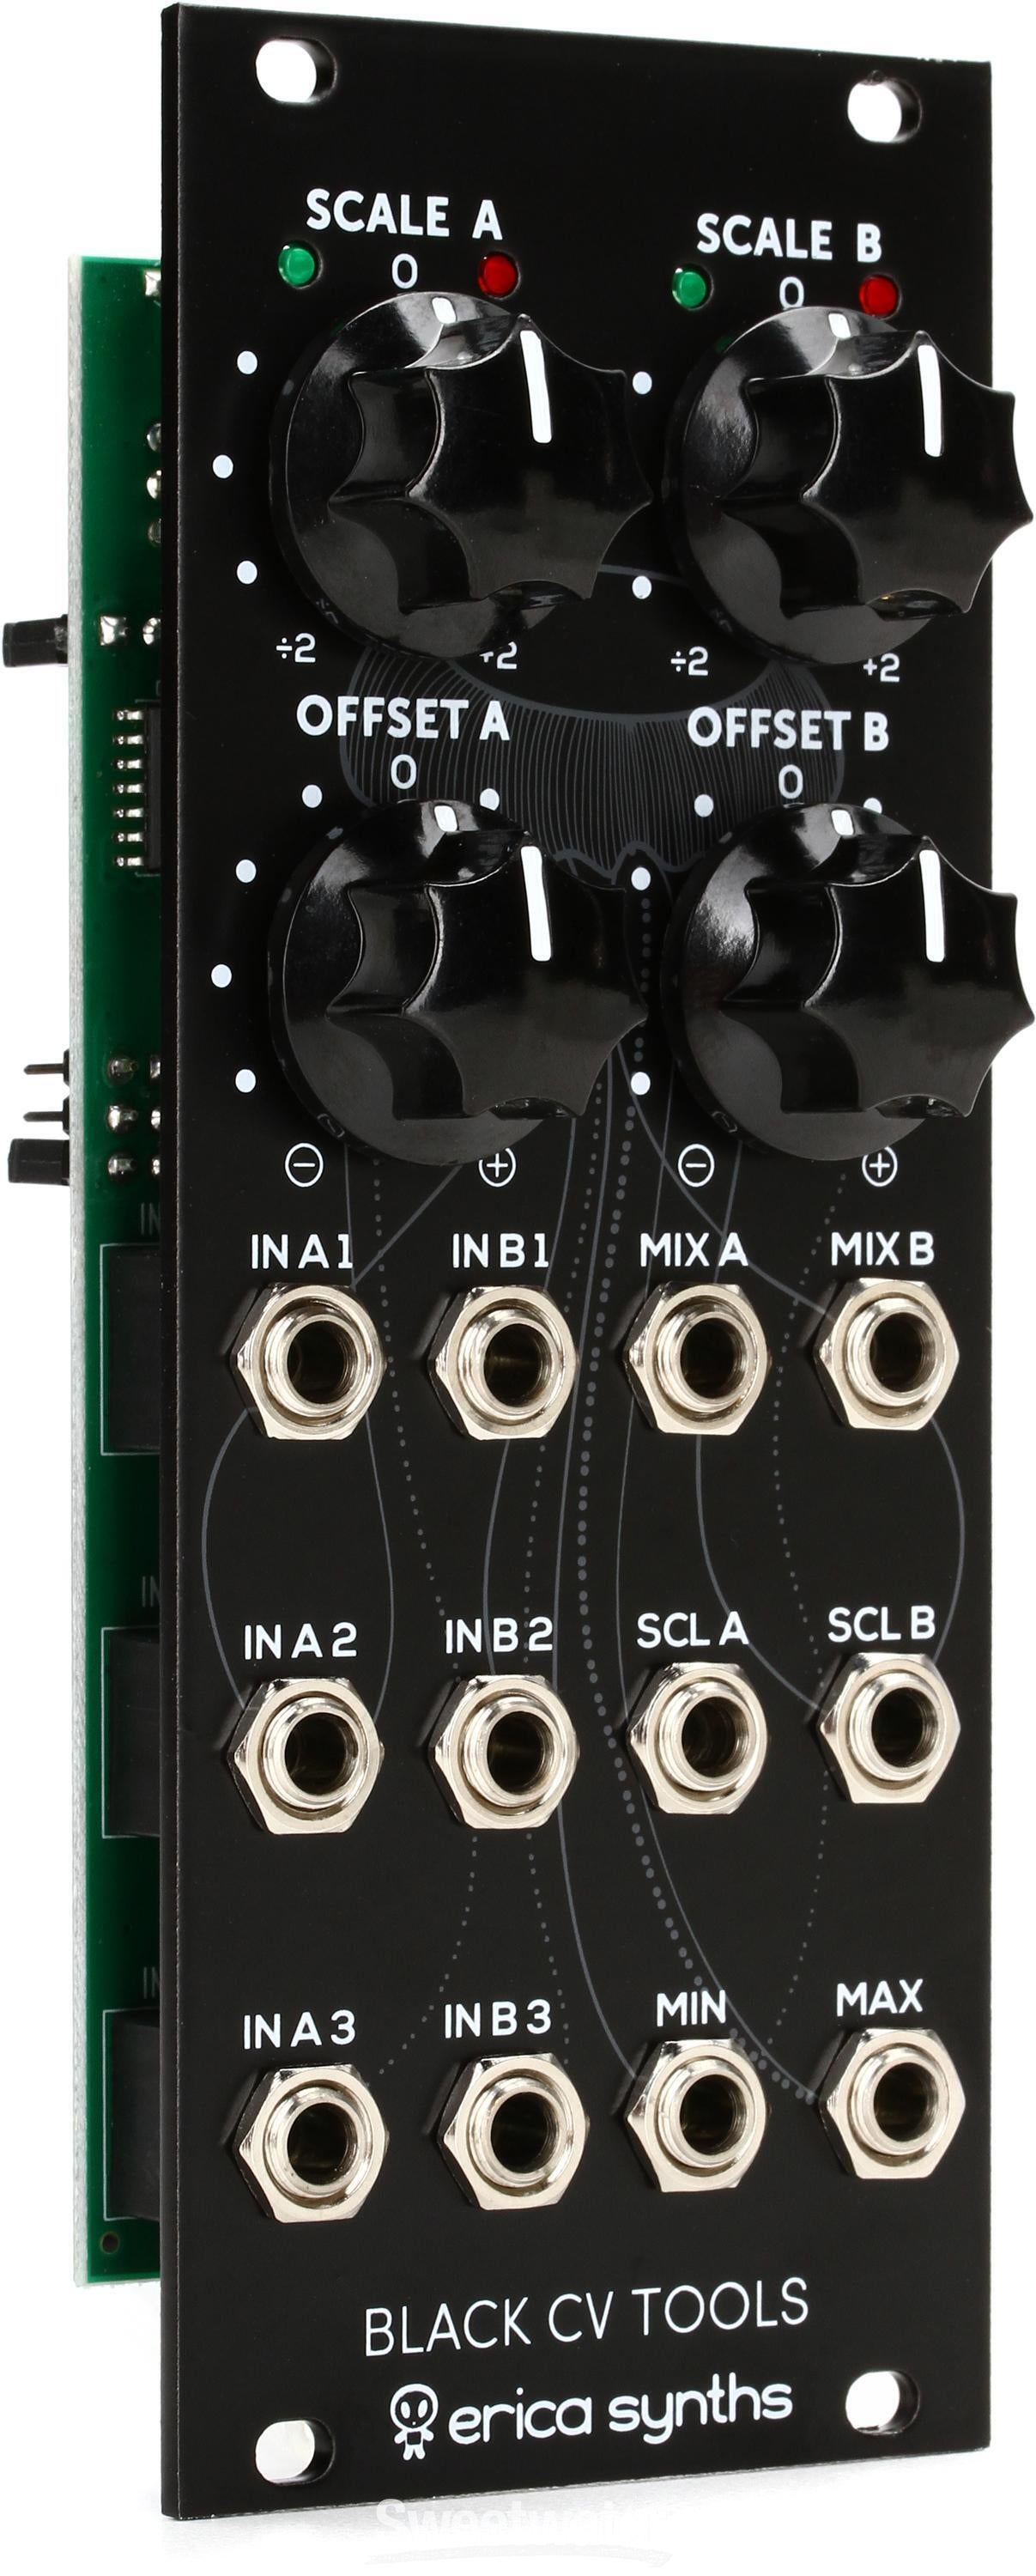 Erica Synths Black CV Tools CV/Audio Mixer with Dual Attenuverters